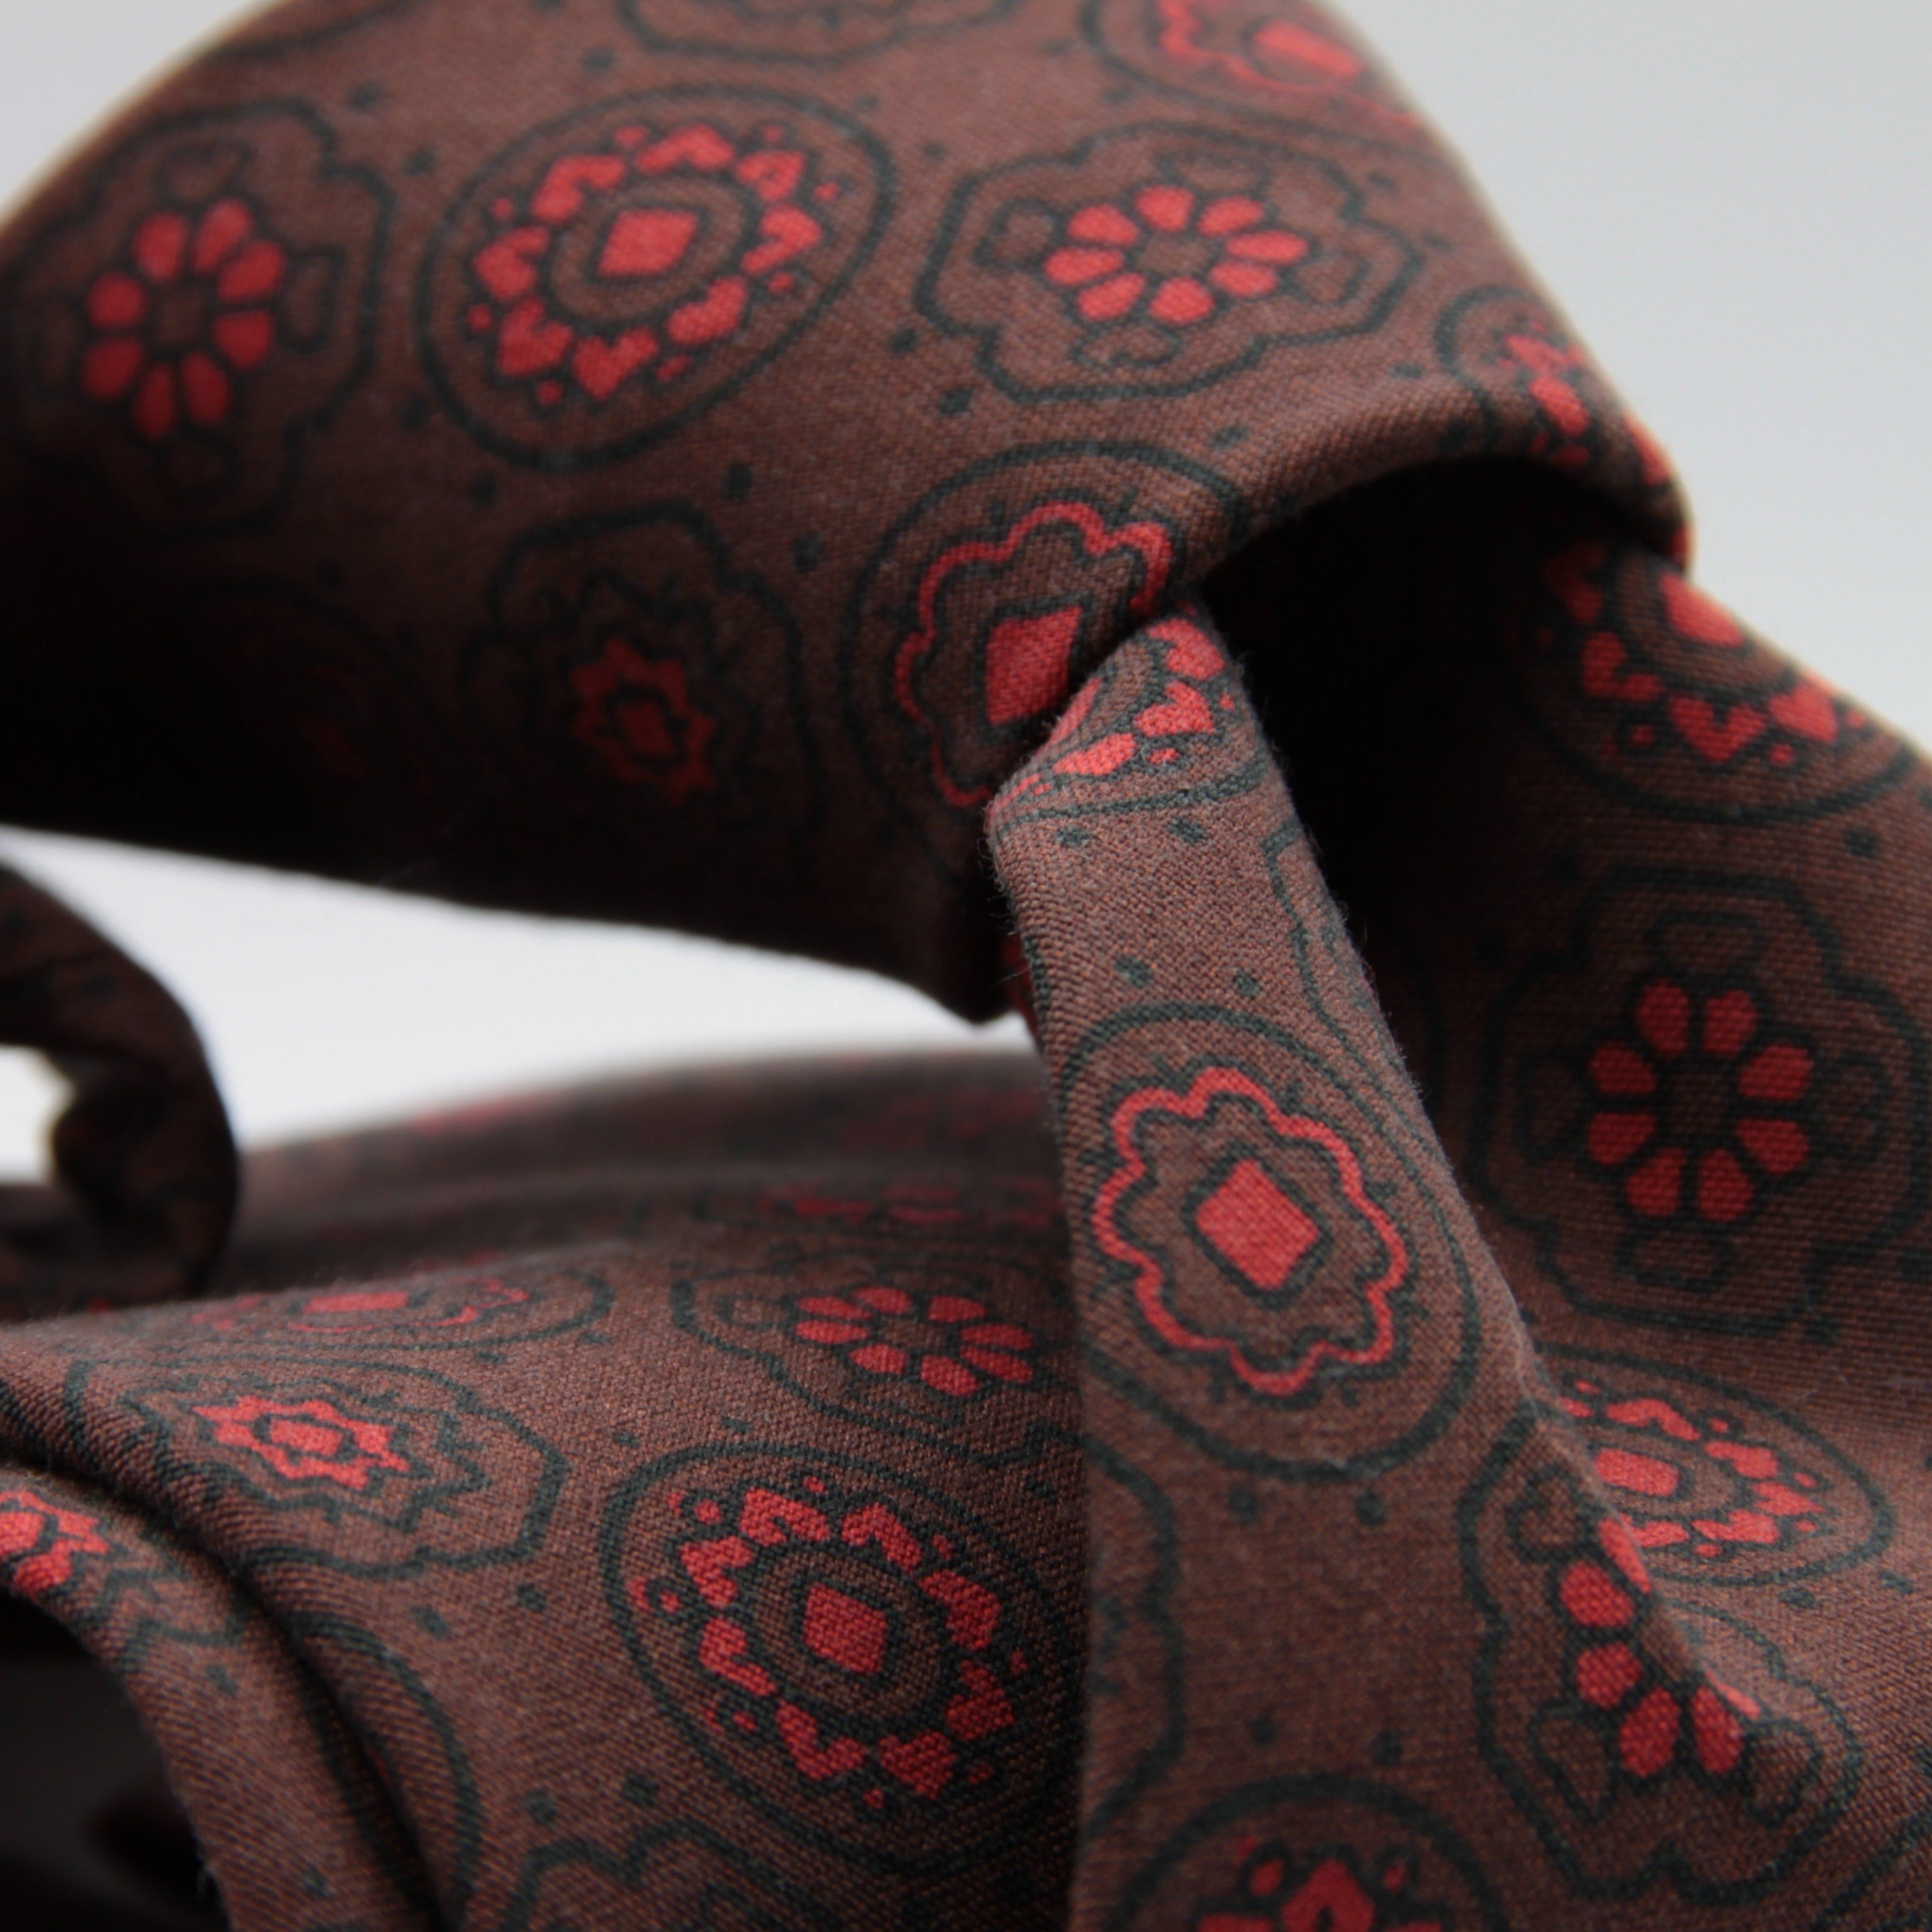 Cruciani & Bella 100% Printed Madder Silk  Italian fabric Unlined tie Brown and Red Motifs Tie Handmade in Italy 8 cm x 150 cm #7641